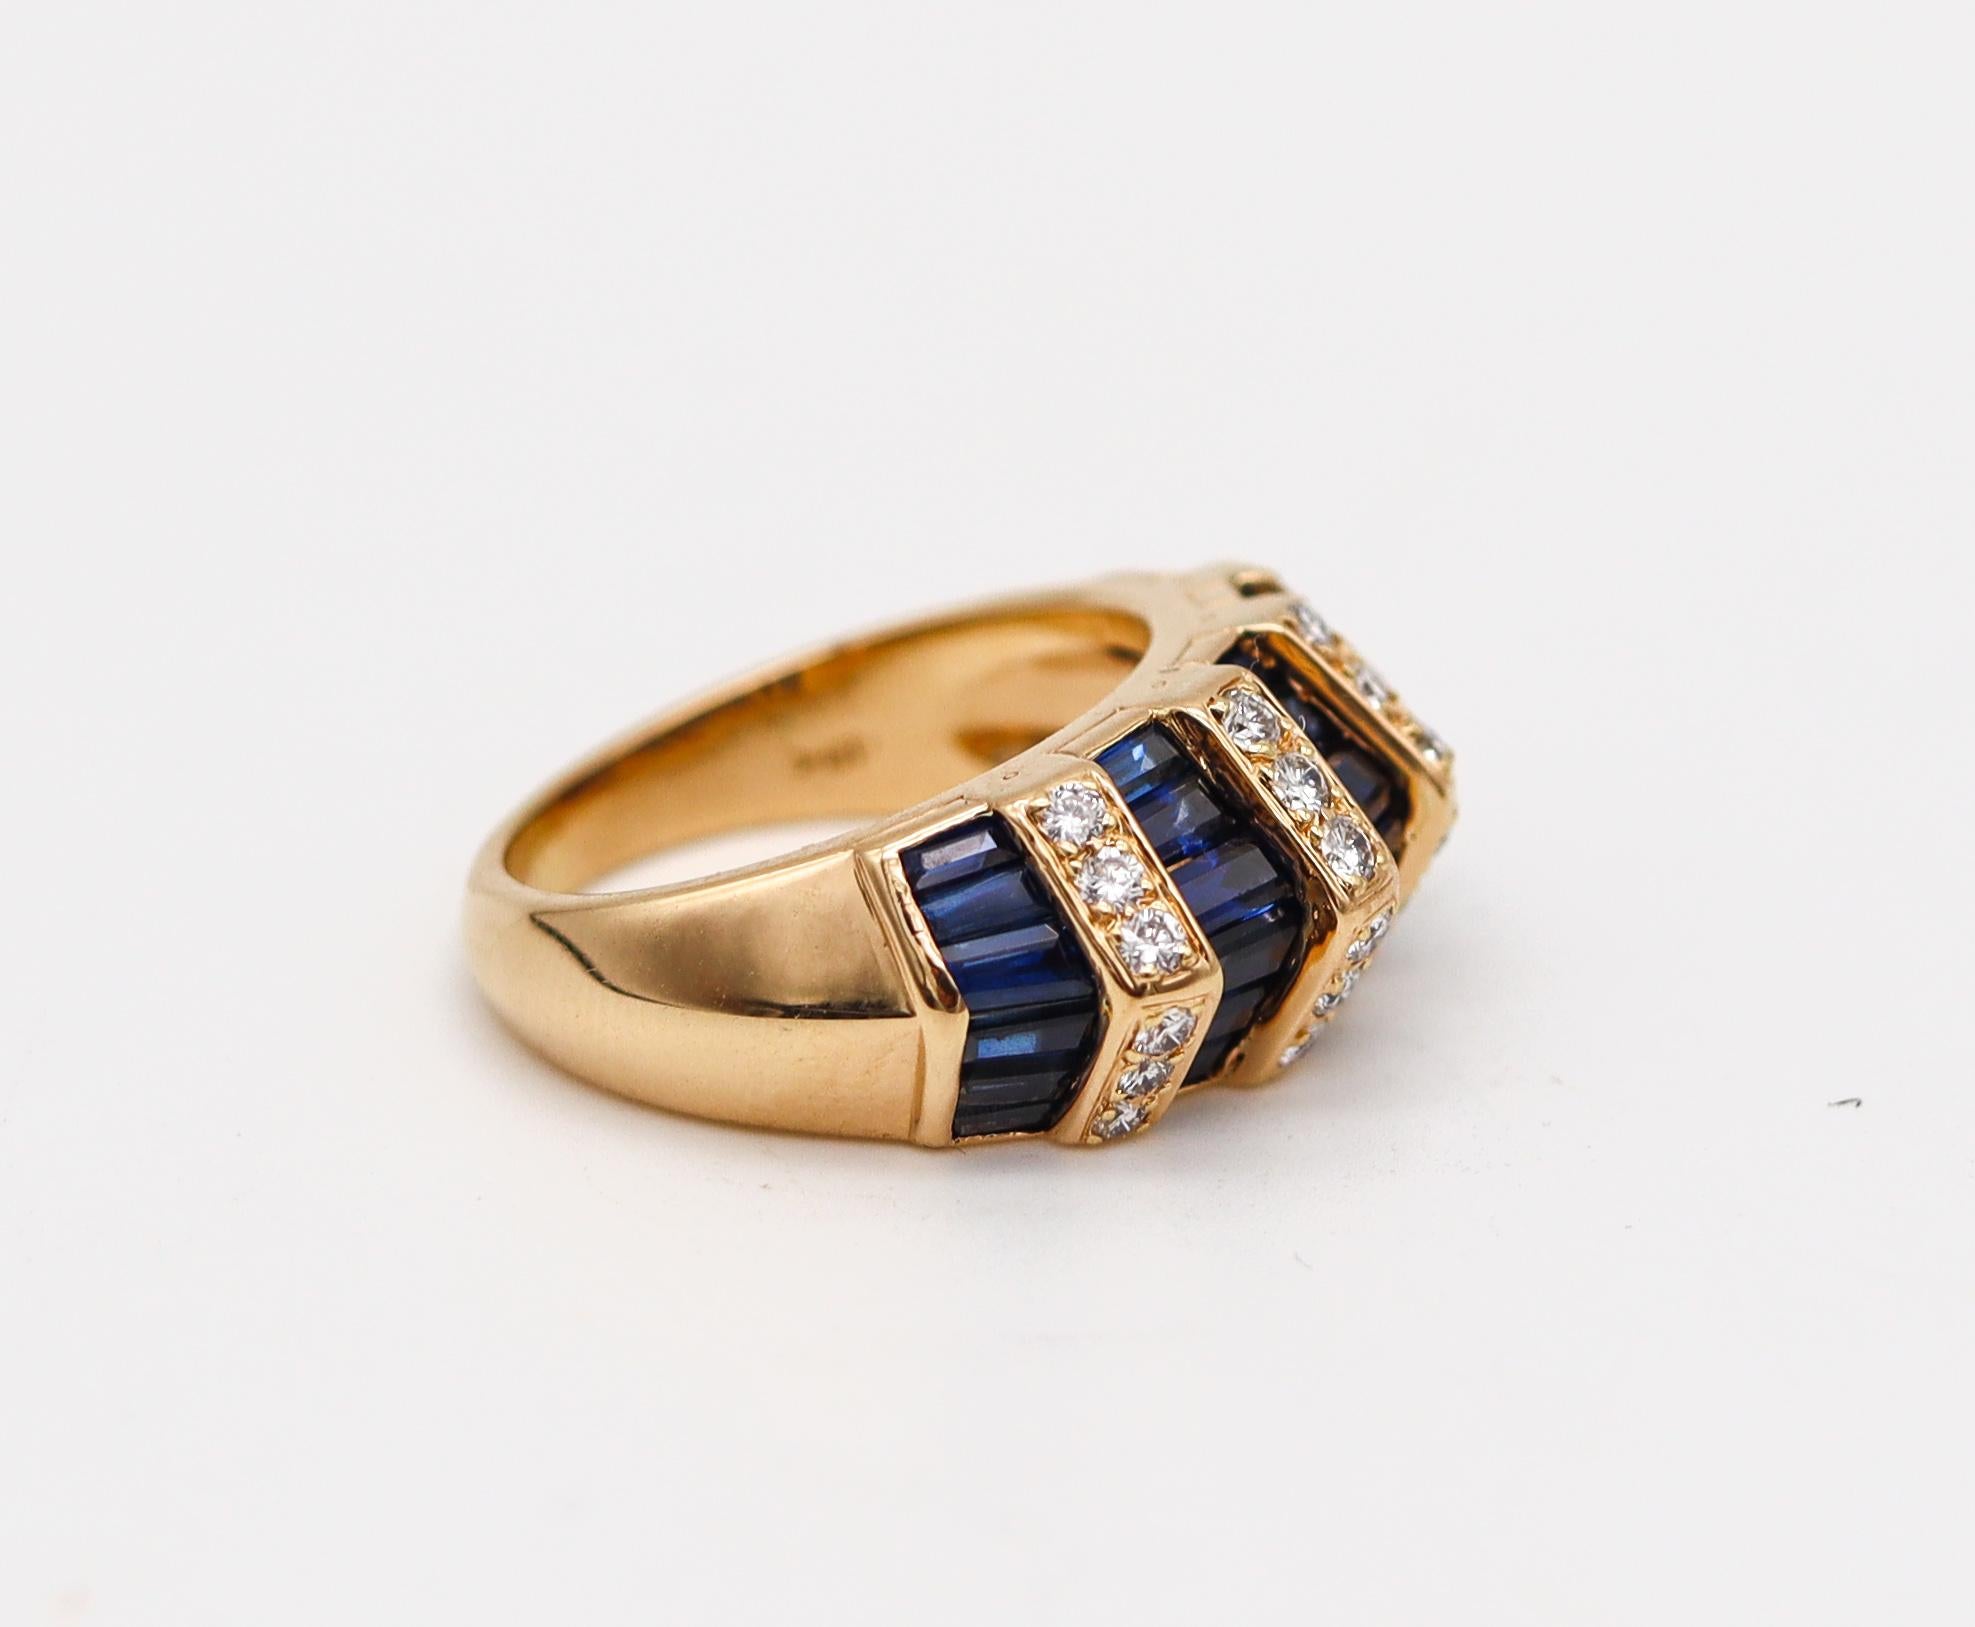 Modernist Oscar Heyman Ring in 18kt Yellow Gold with 3.57ctw in Sapphires and Diamonds